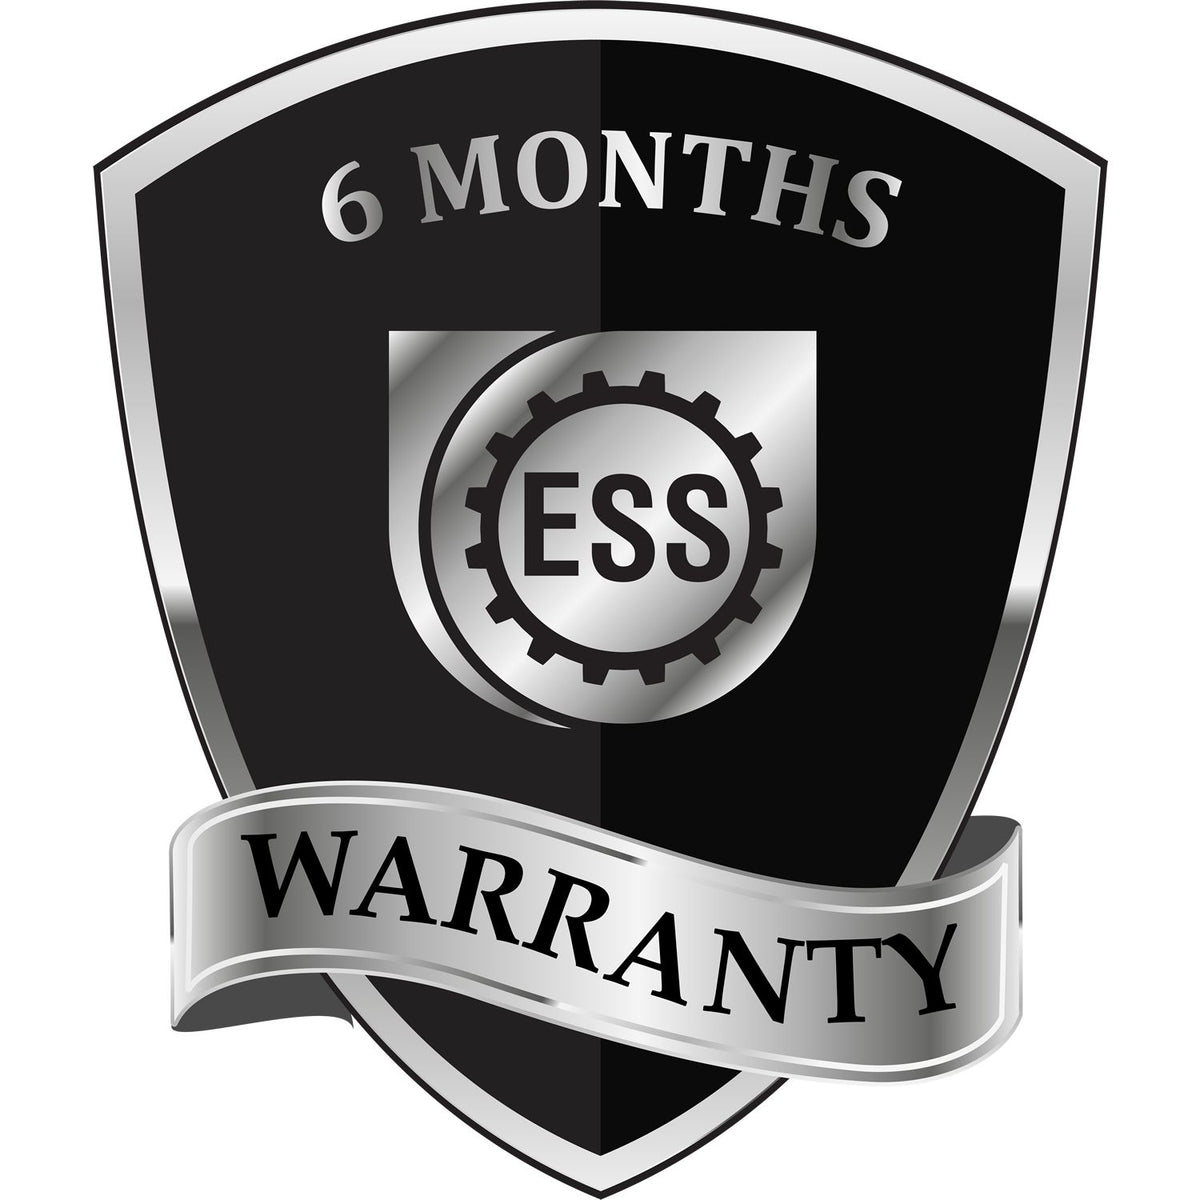 A badge or emblem showing a warranty icon for the Texas Professional Engineer Seal Stamp